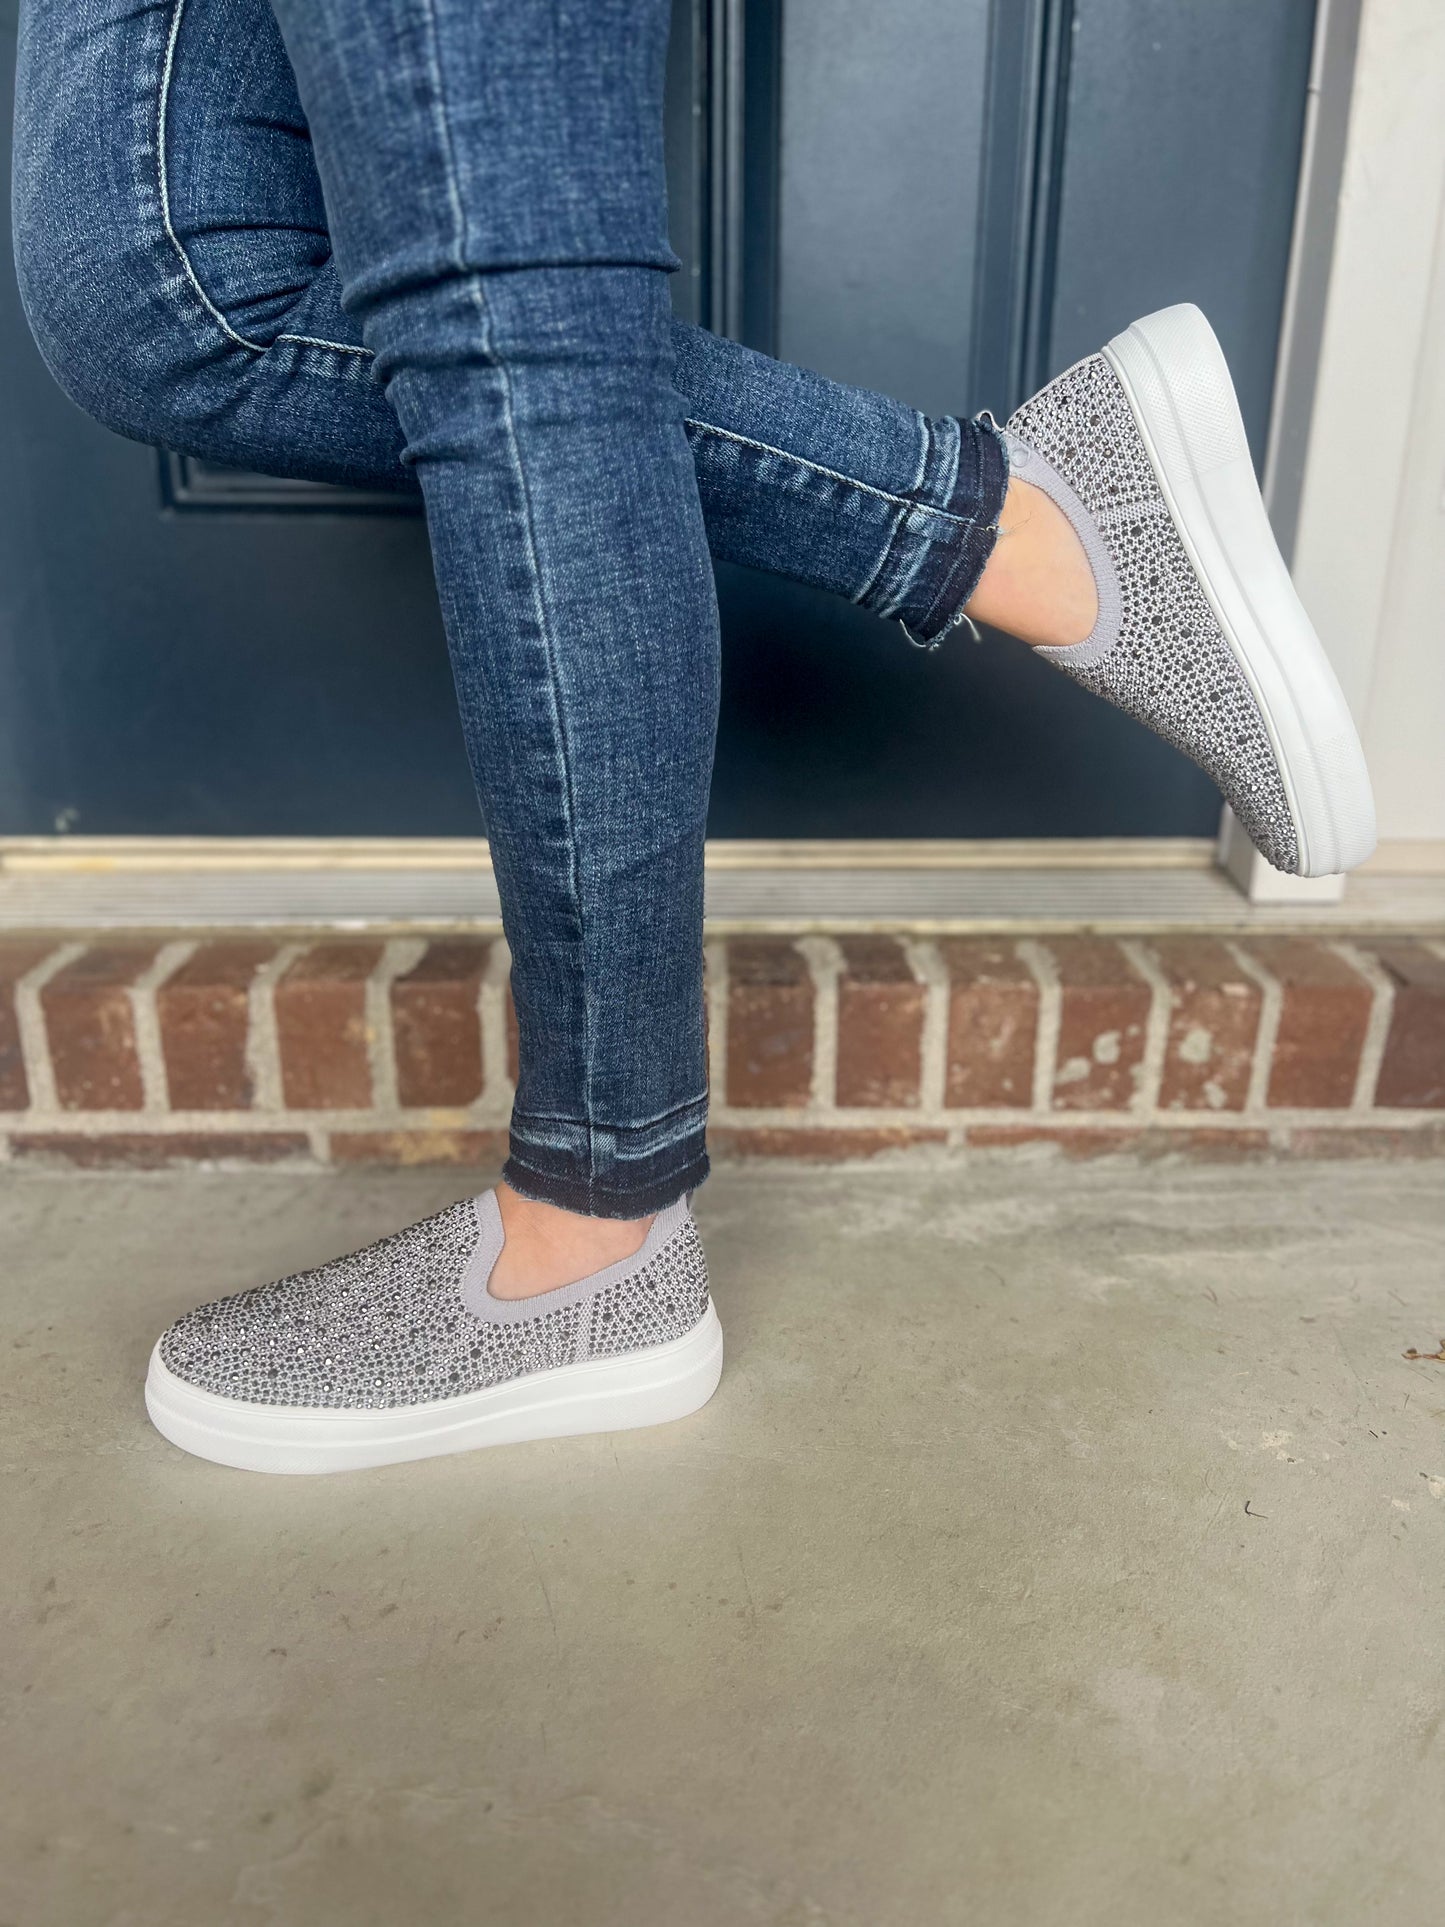 New! Corkys Swank Slip-on Sneakers - Gray Crystals